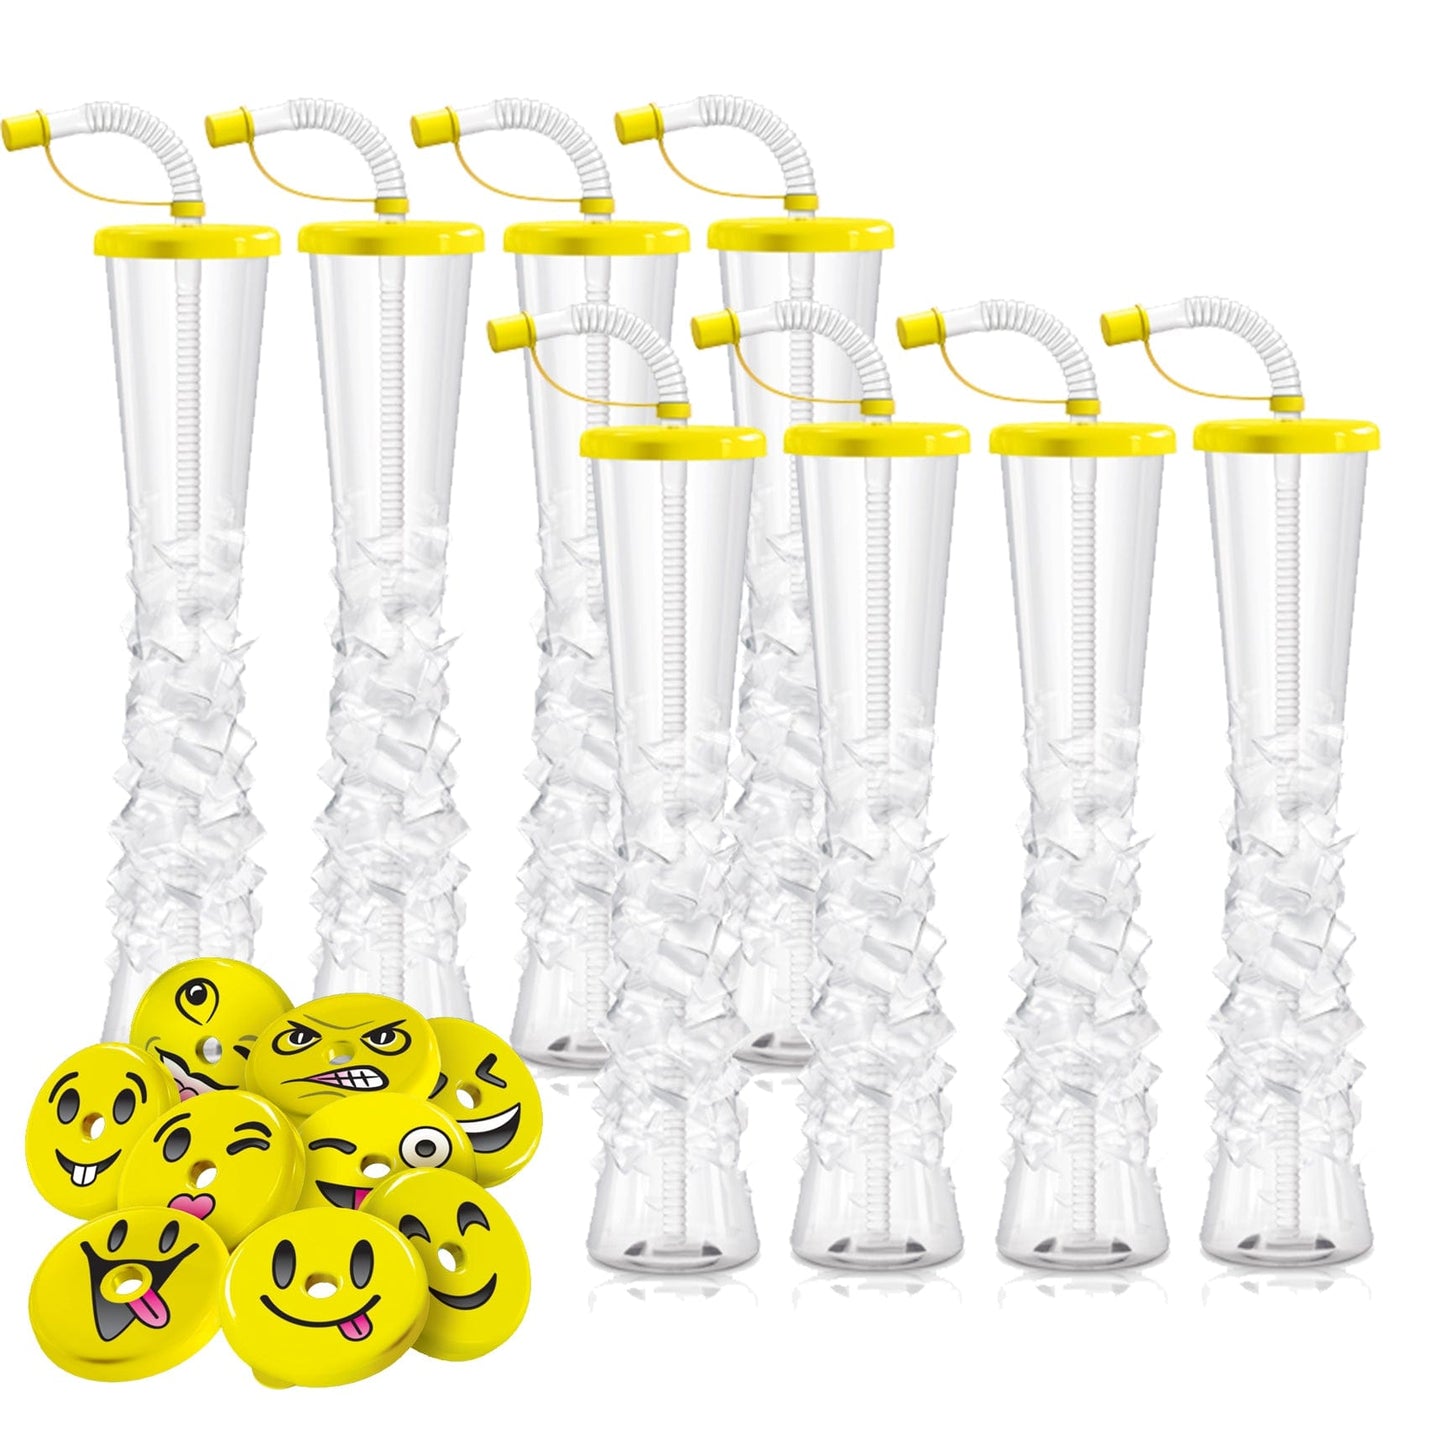 Sweet World USA Yard Cups Smiley Face Ice Yard Cups (54 Cups - Yellow Lids) - for Margaritas, Cold Drinks, Frozen Drinks, Kids Parties - 17 oz. (500 ml) cups with lids and straws